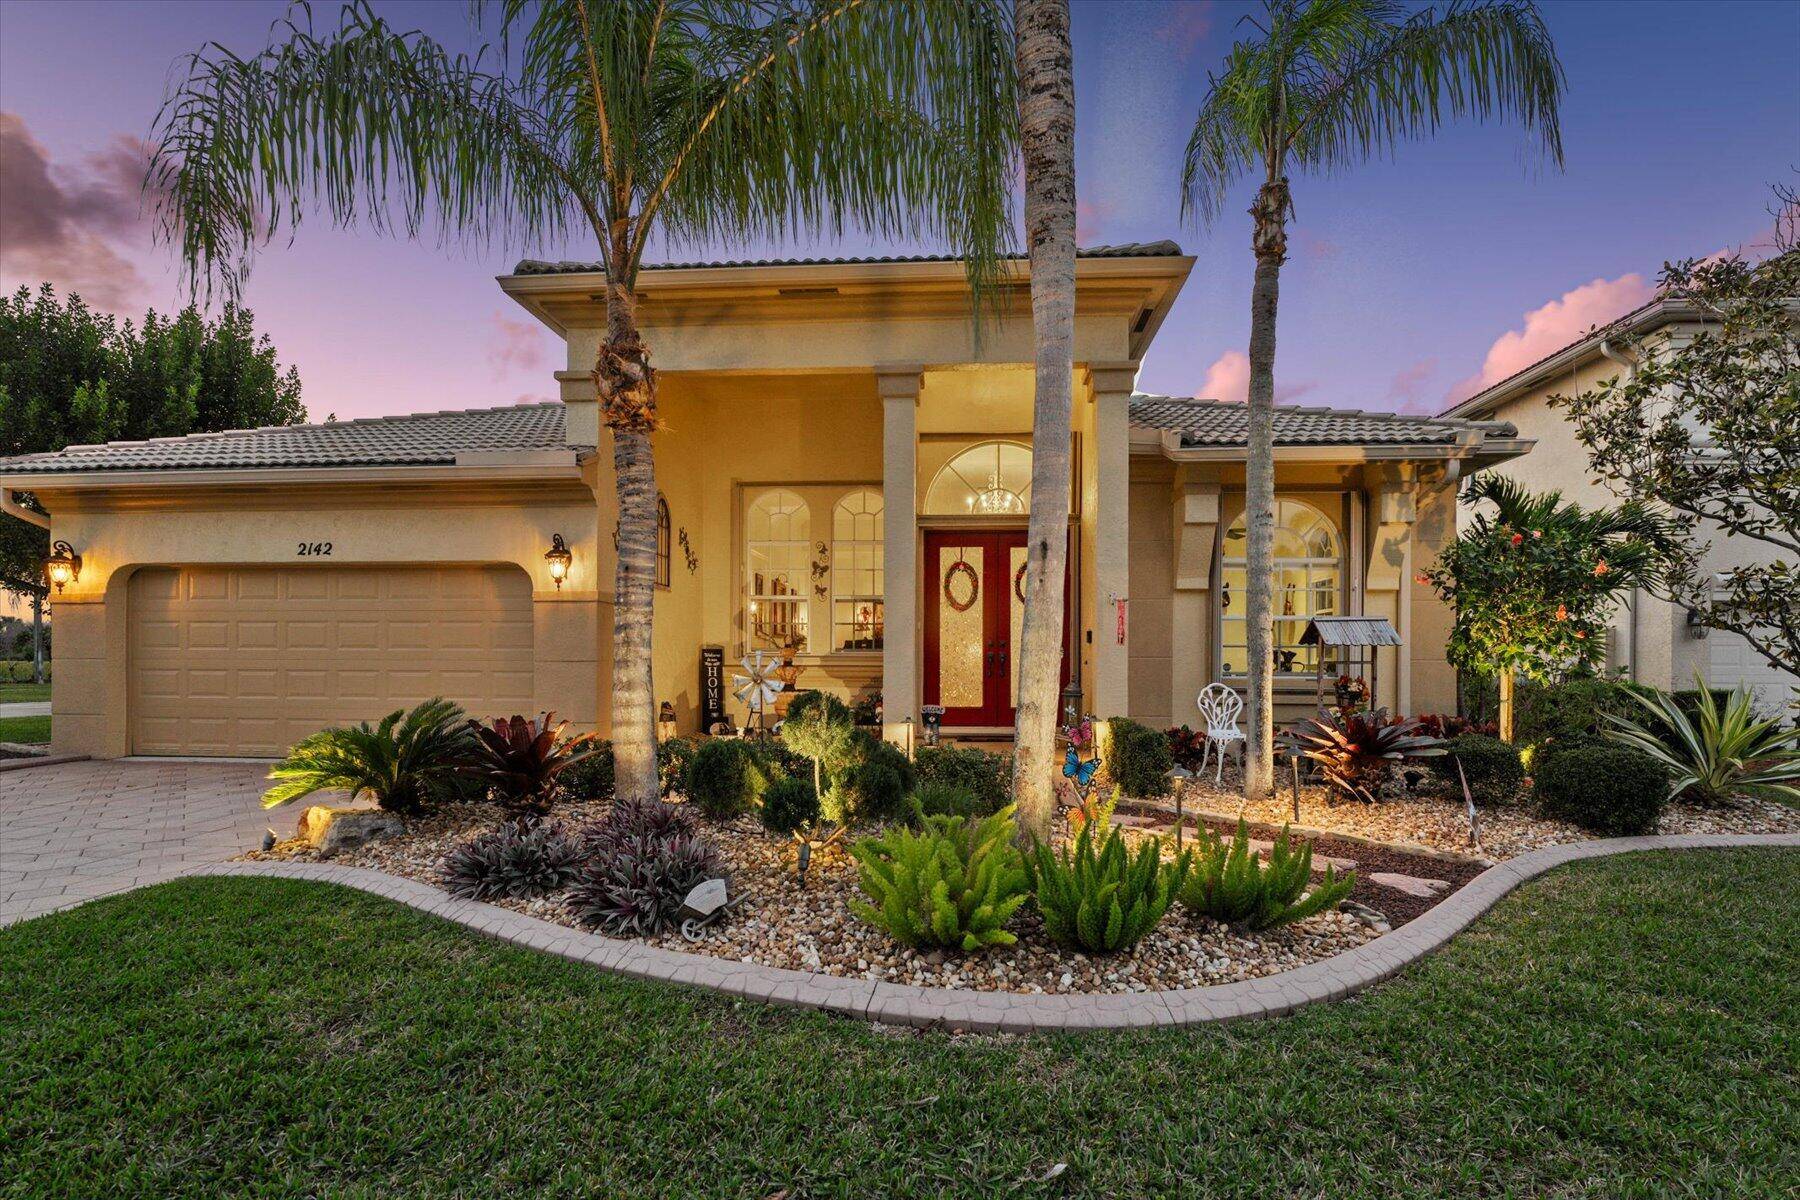 Welcome to 2142 Bellcrest Circle, where luxury meets tranquility in the heart of Royal Palm Beach, FL.